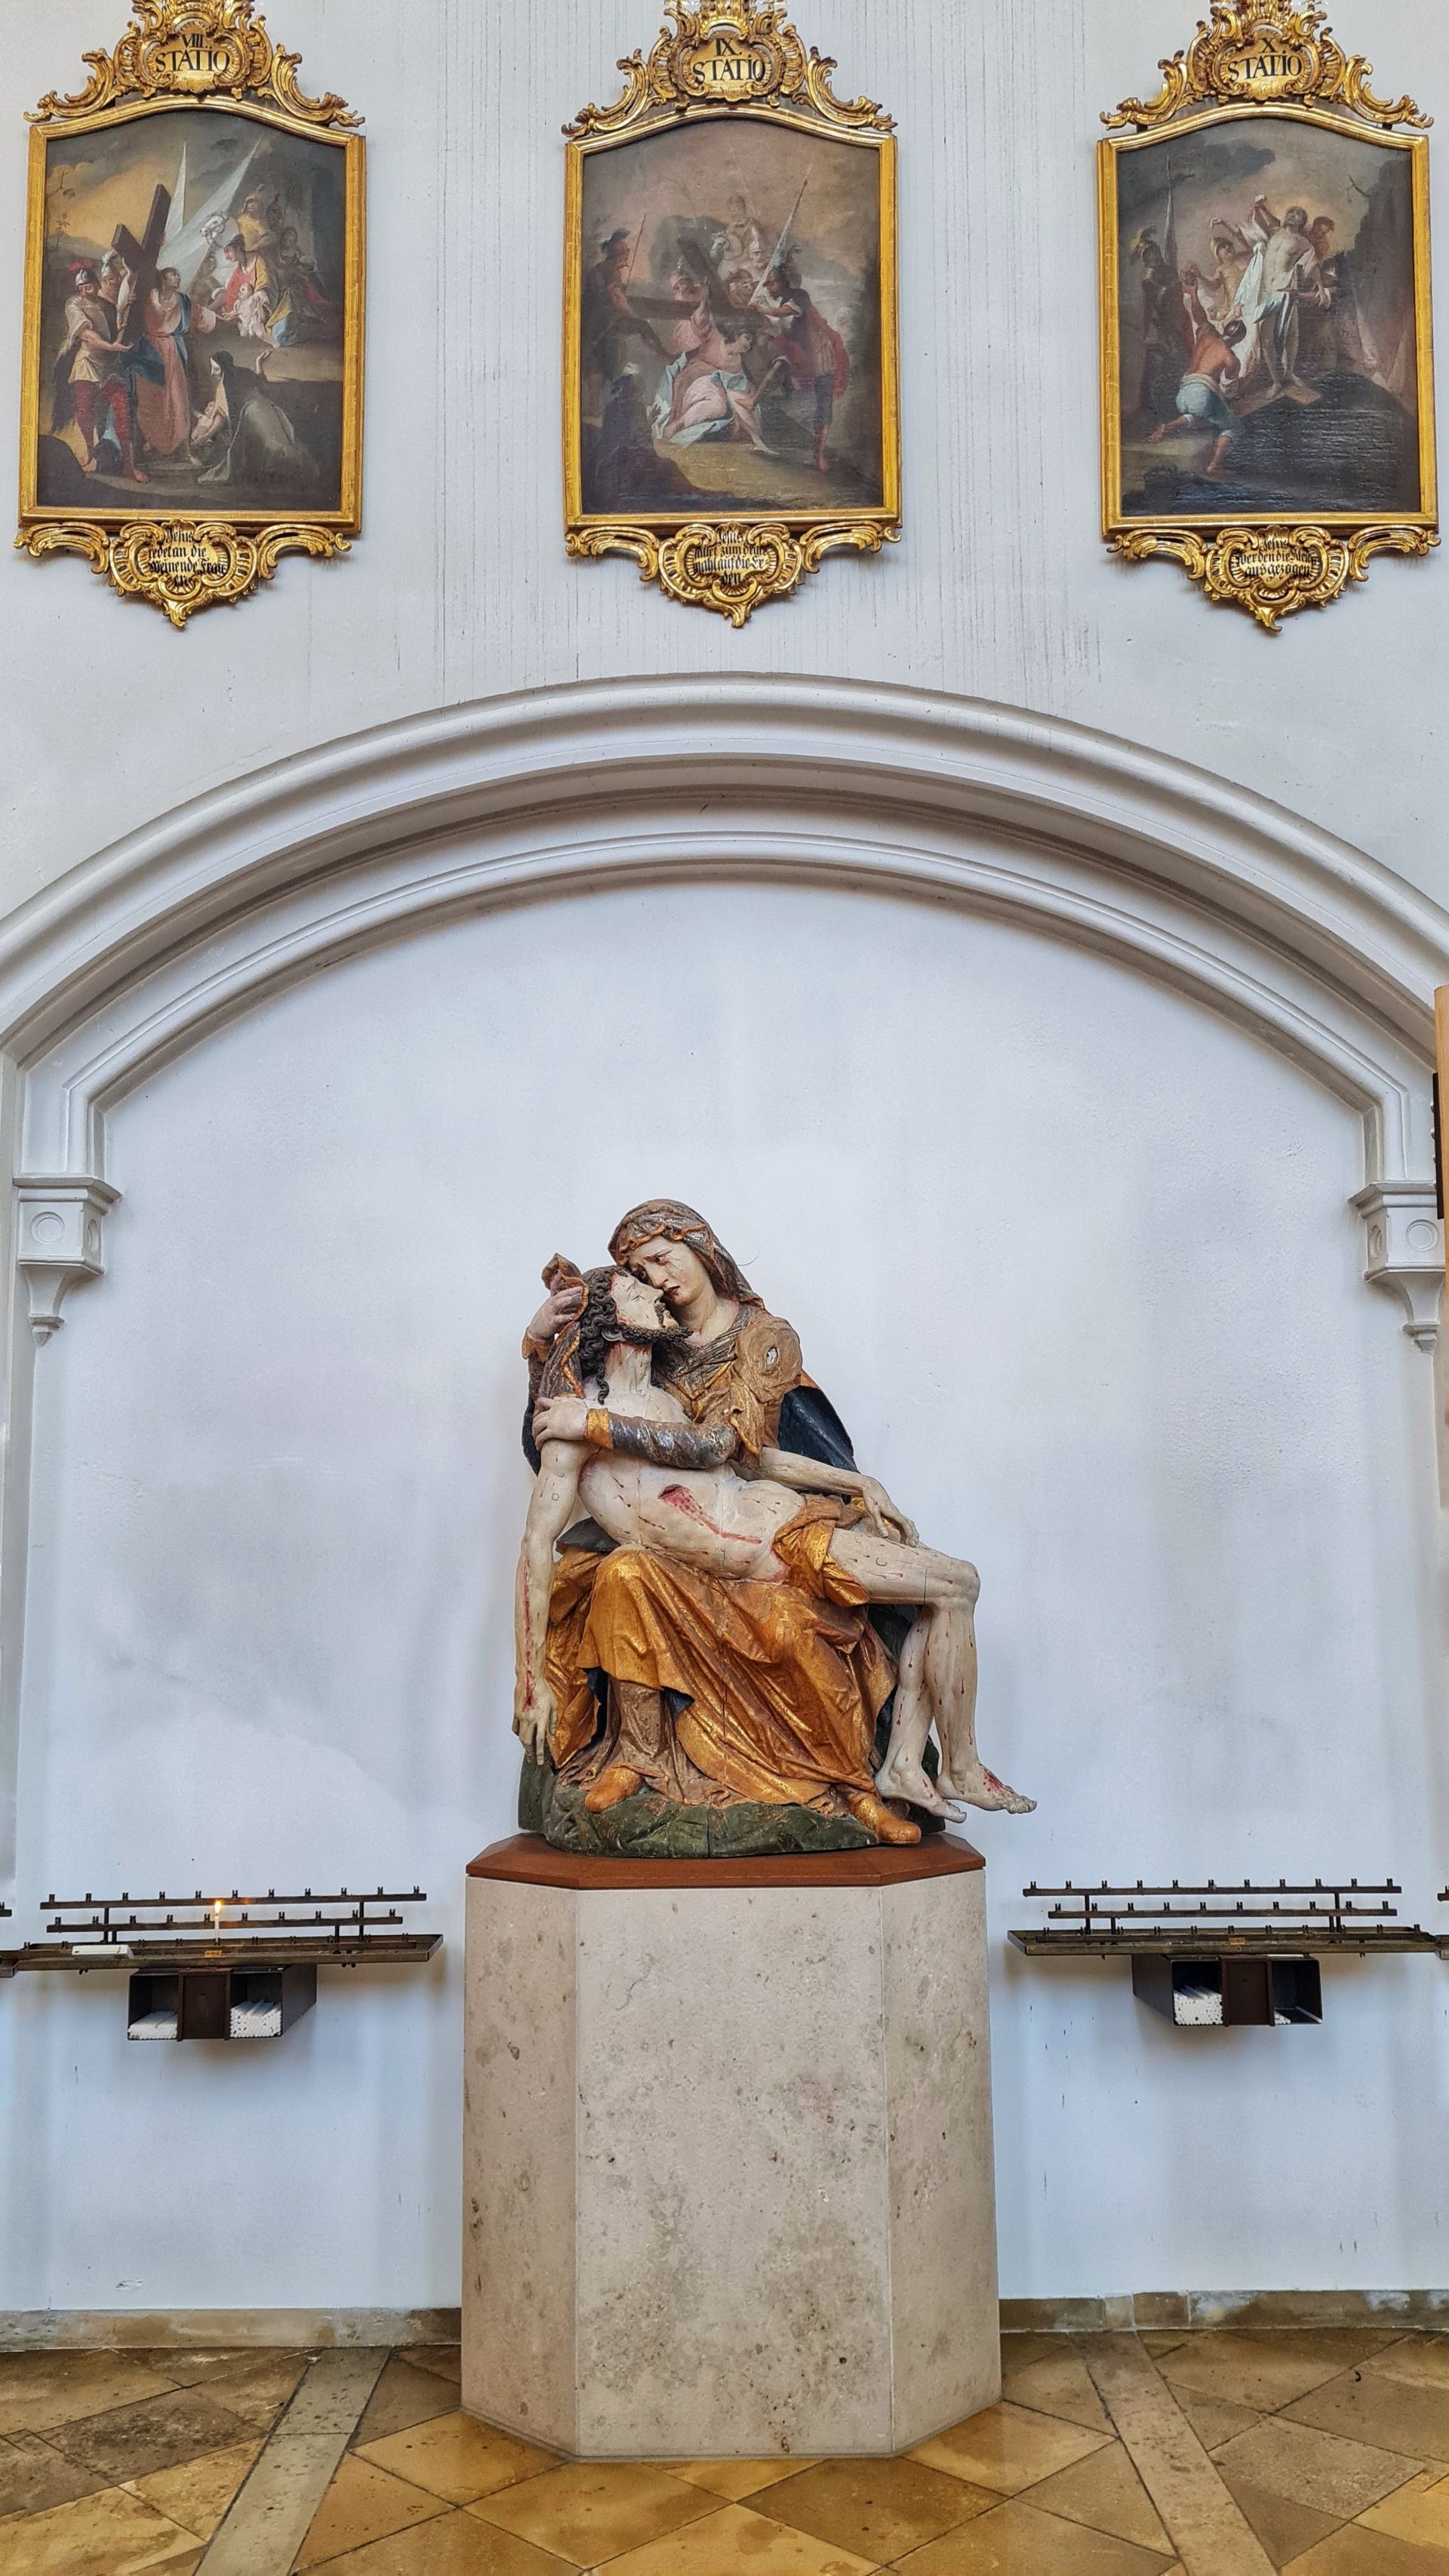 Pieta's Influence on Art and Culture